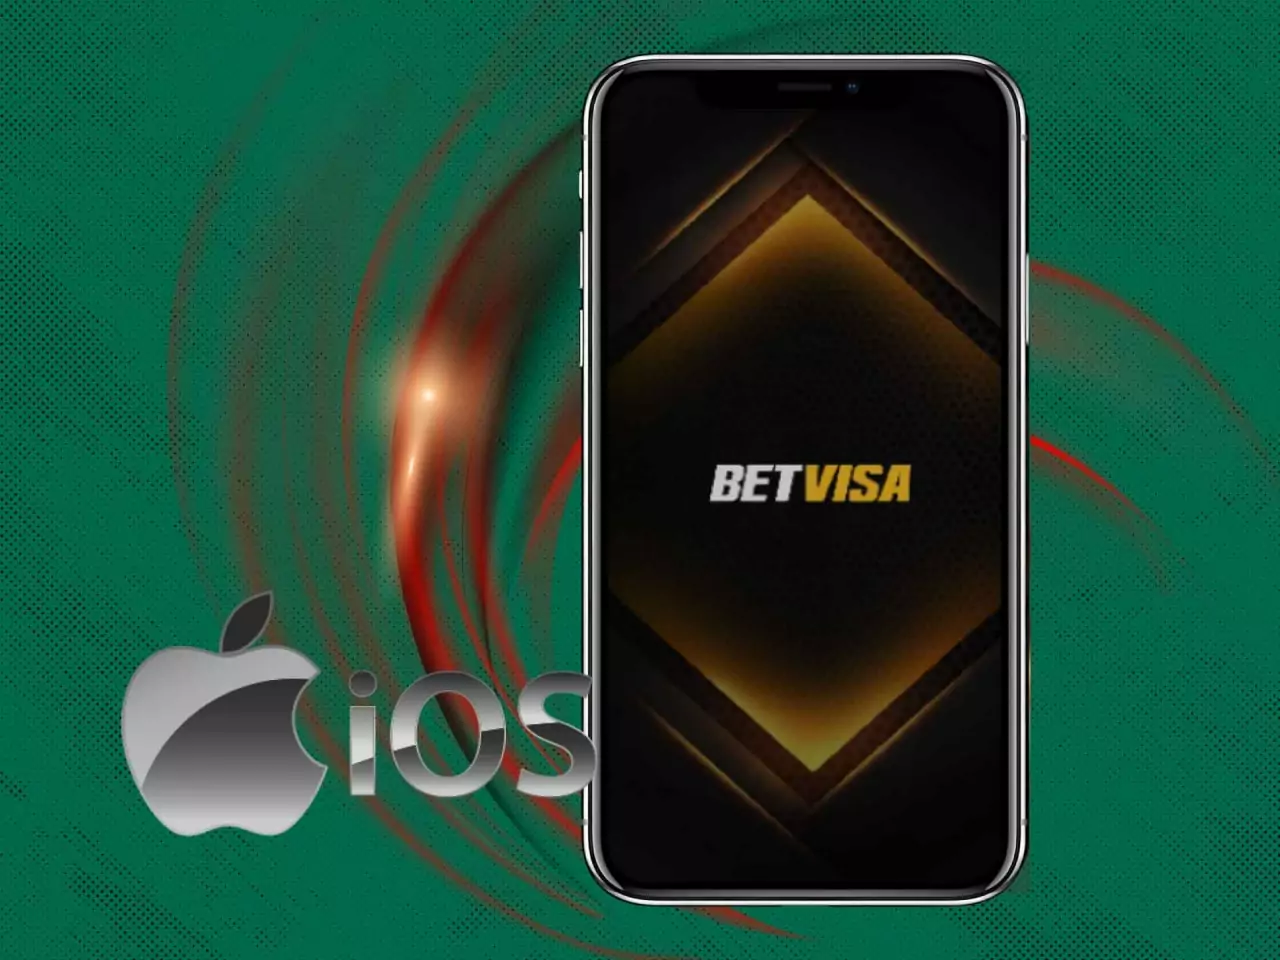 Go to the Betvisa website and download the mobile app on your iPhone.